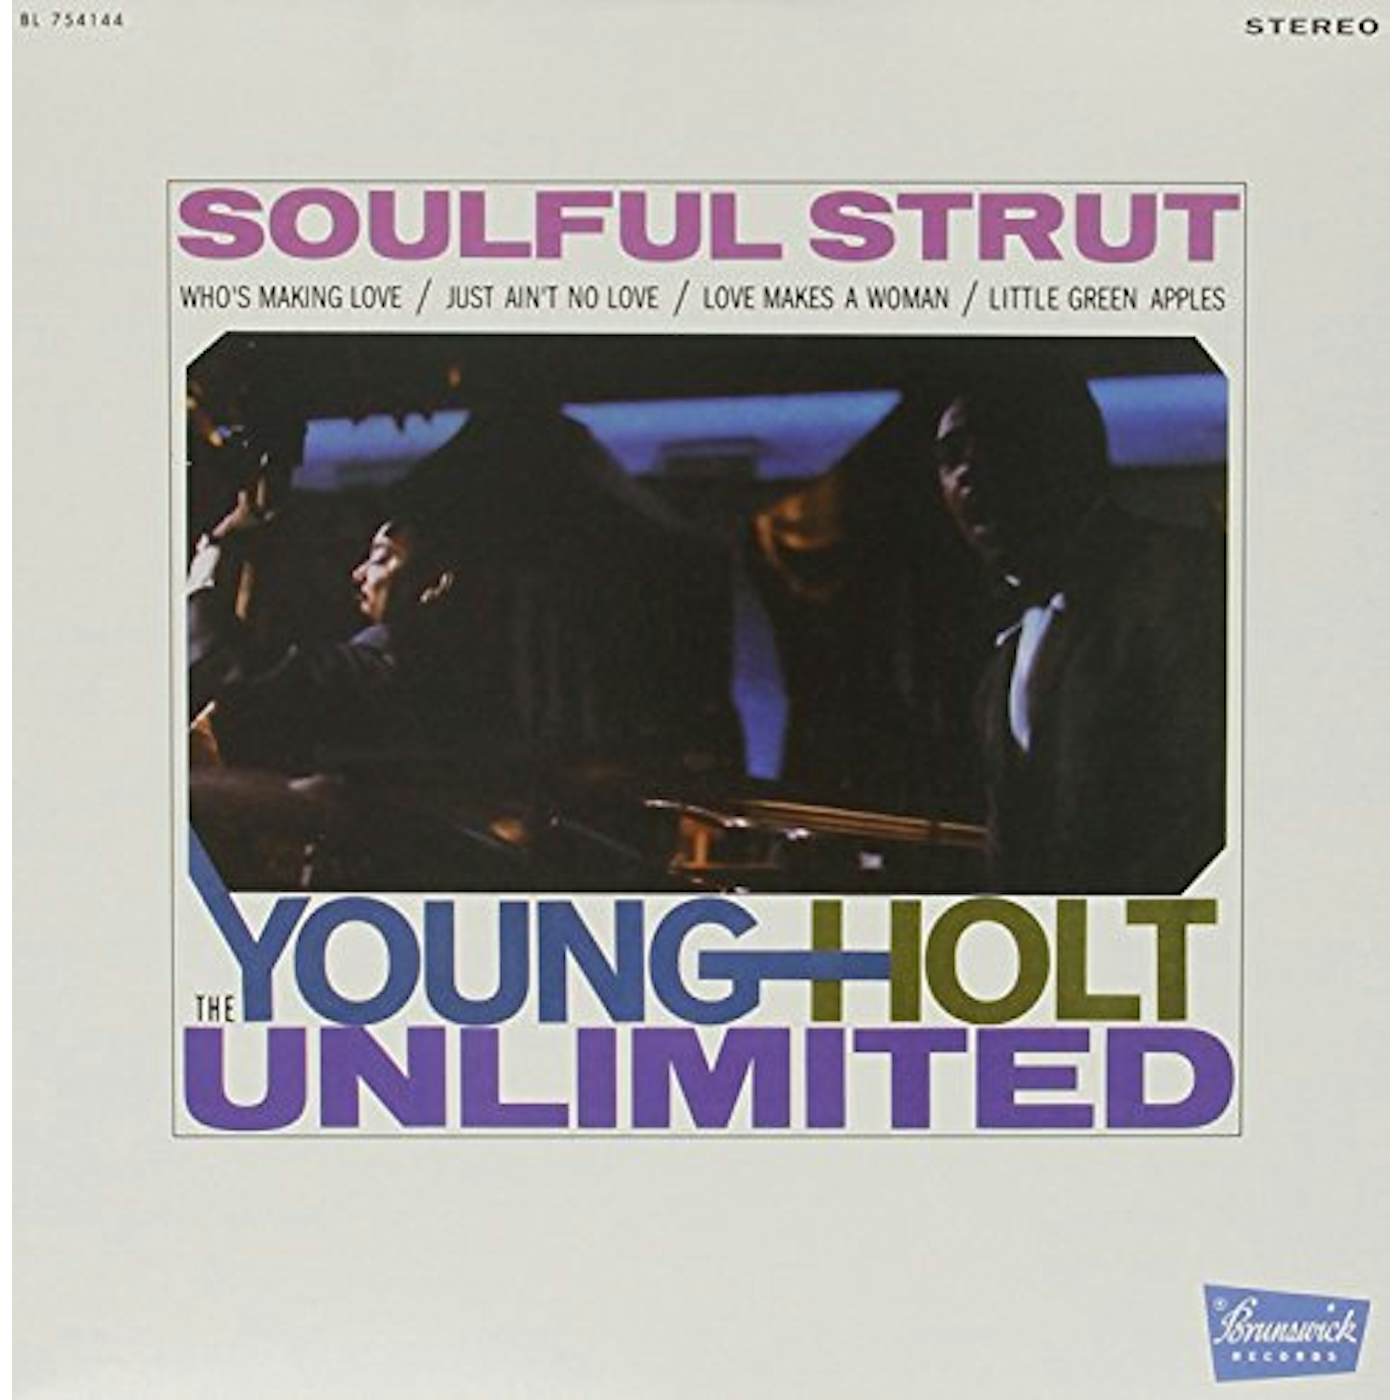 Young-Holt Unlimited Soulful Strut Vinyl Record